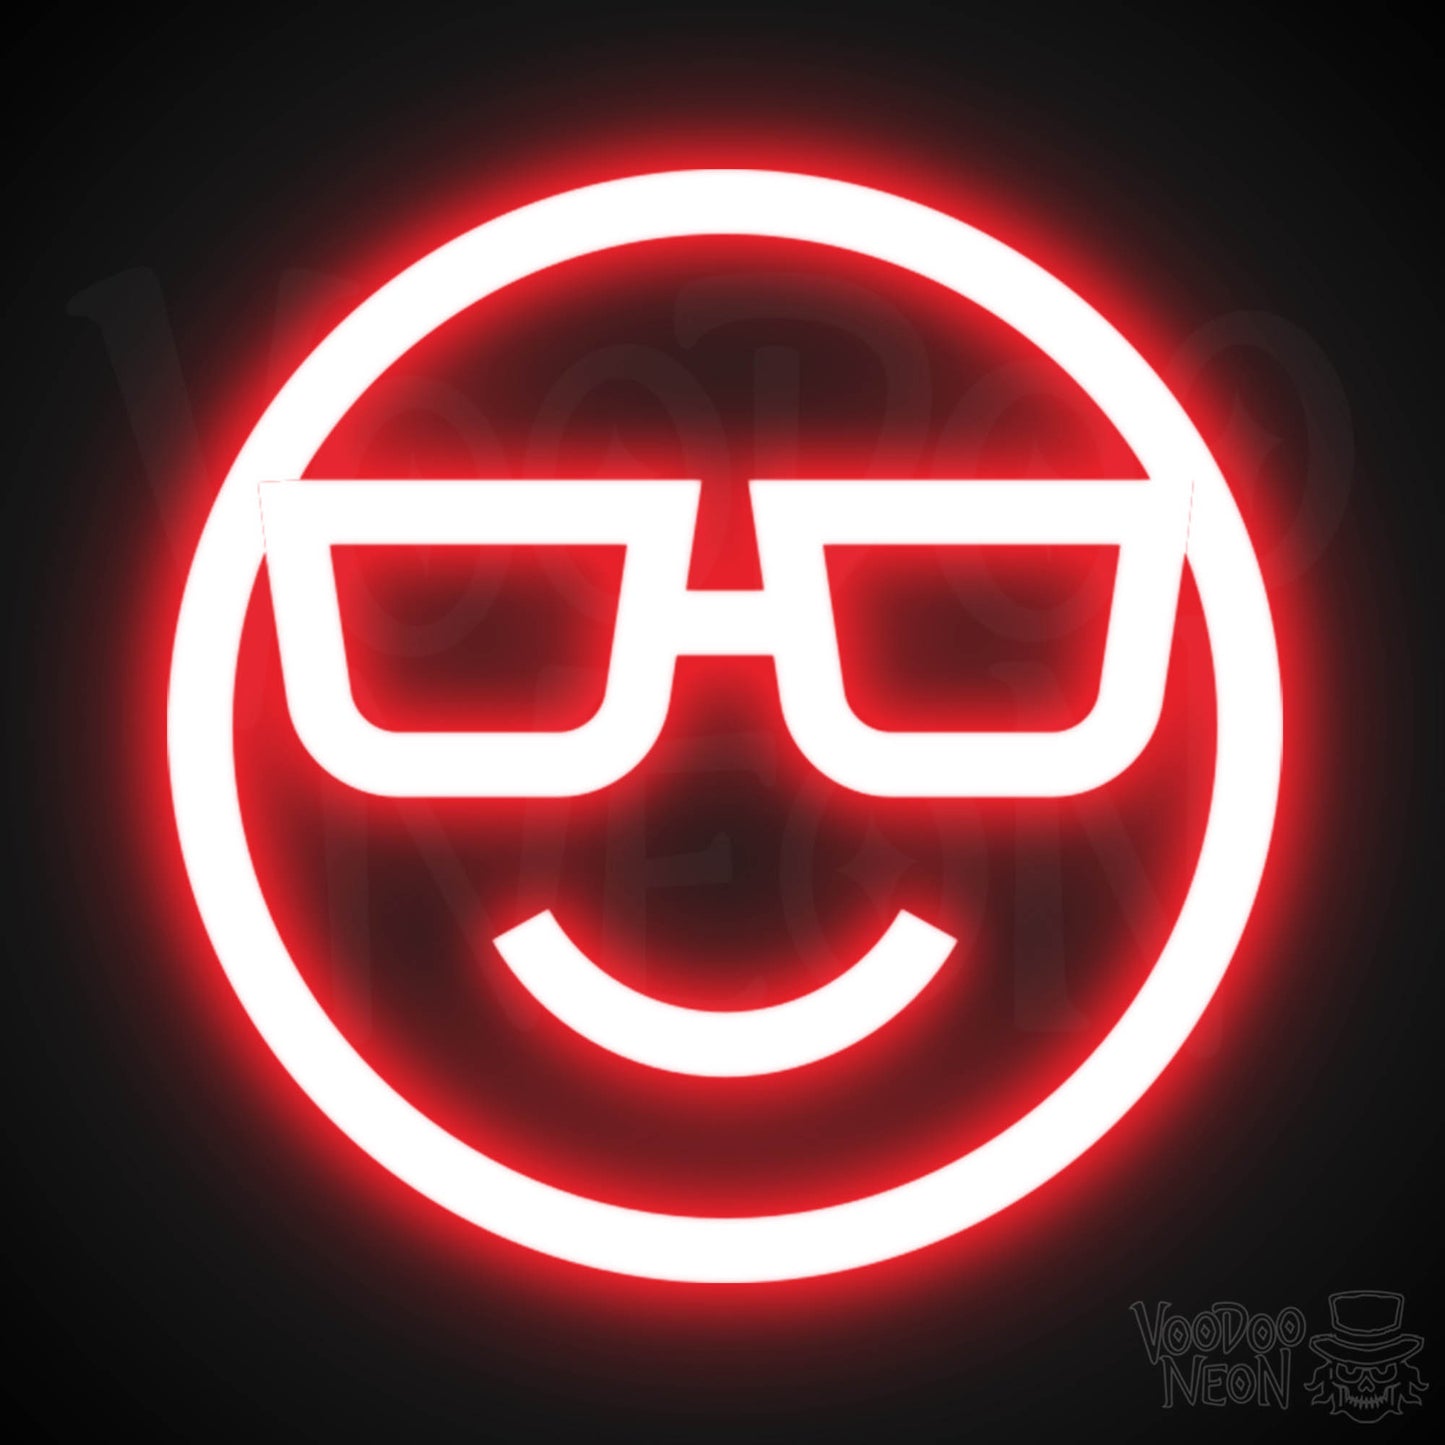 Neon Smiley Face - Smiley Face Neon Sign - LED Wall Art - Color Red